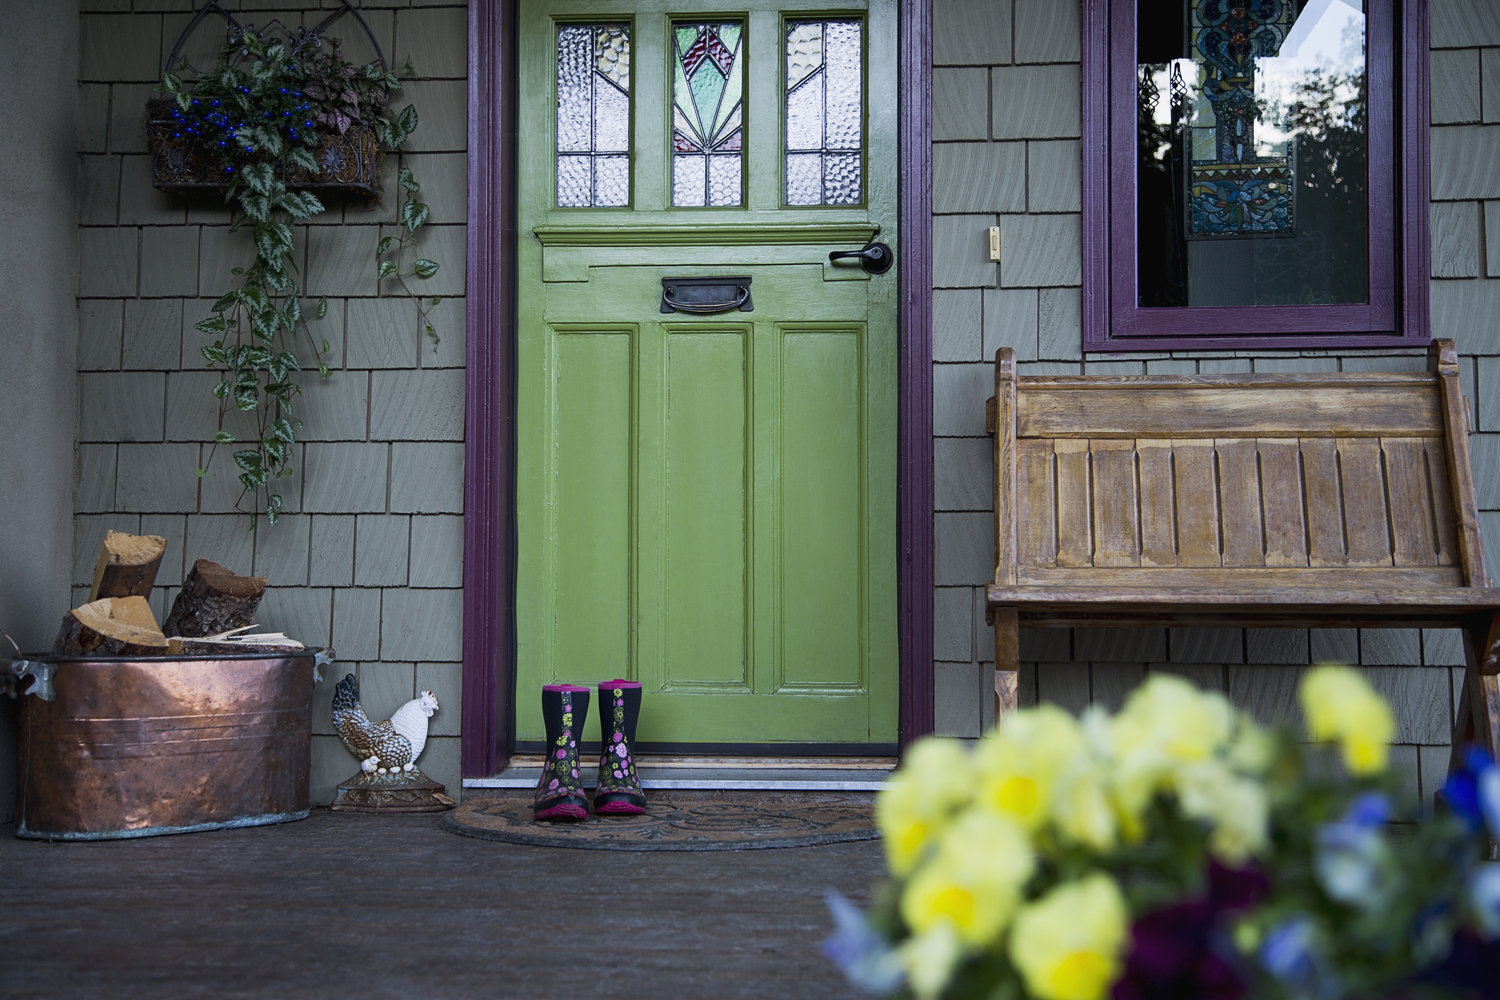 House with a green door and purple trim